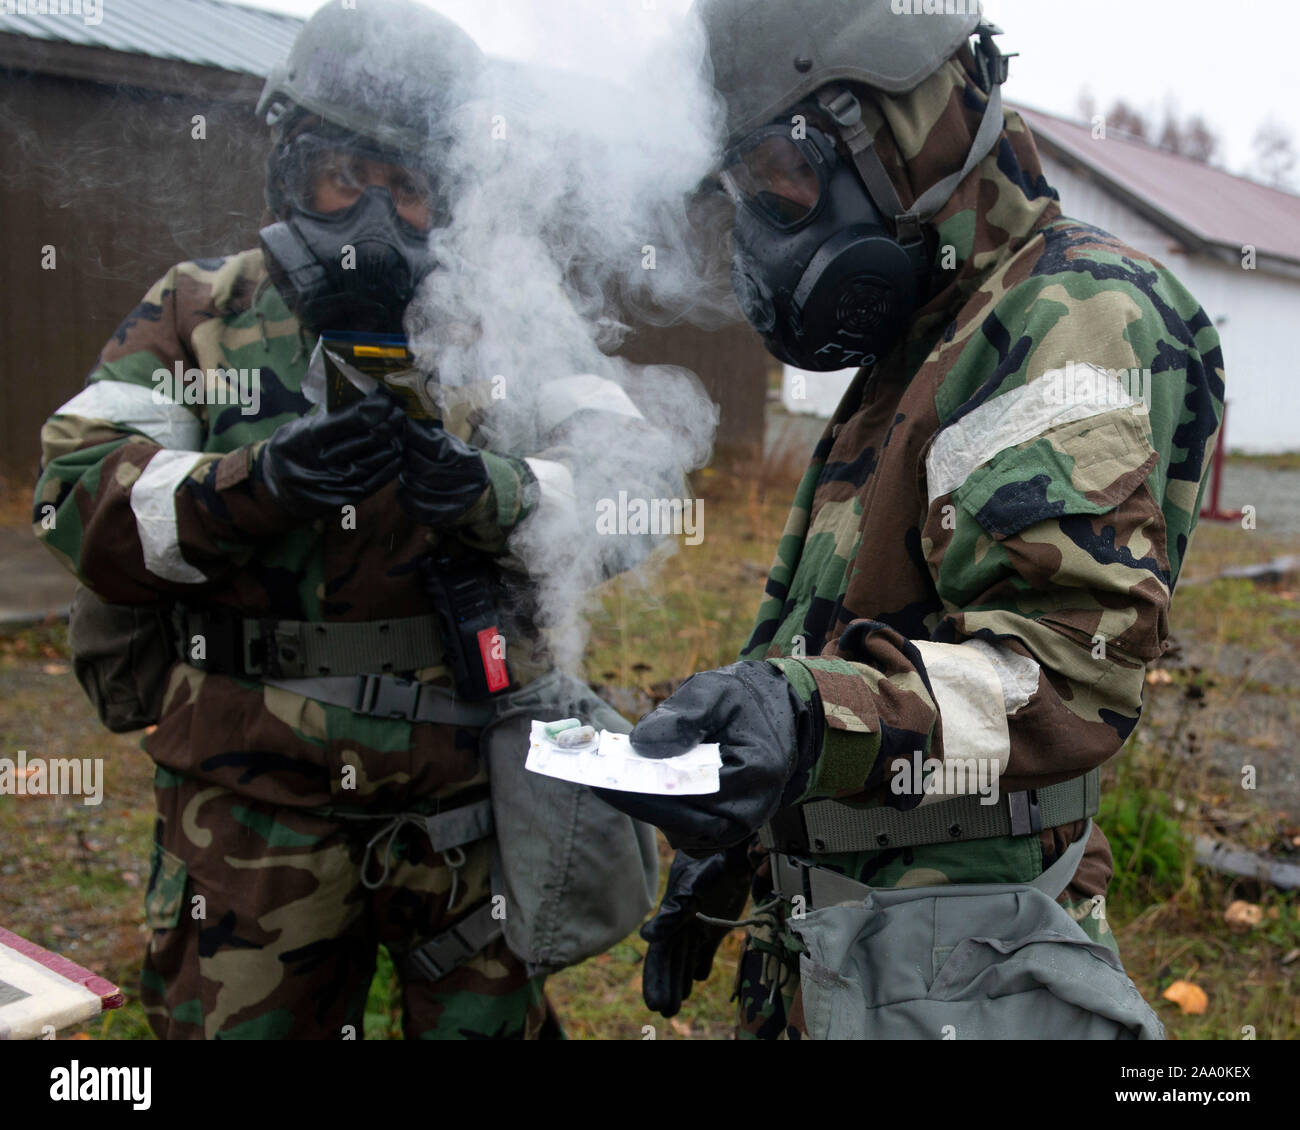 U.S. Airmen assigned to the 673d Air Base Wing use a chemical detection kit in a simulated hazardous environment during Polar Force 20-1 at Joint Base Elmendorf-Richardson, Alaska, Oct. 9, 2019. Designed to test JBER’s mission readiness, Polar Force 20-1 is a two-week exercise that hones Airmen’s skills and experience when facing adverse situations. Airmen refined their contingency tactics, techniques and procedures in support of the Pacific Air Force’s Agile Combat Employment concept of operations. Agile Combat Support excellence yields multi-domain operations success. Stock Photo